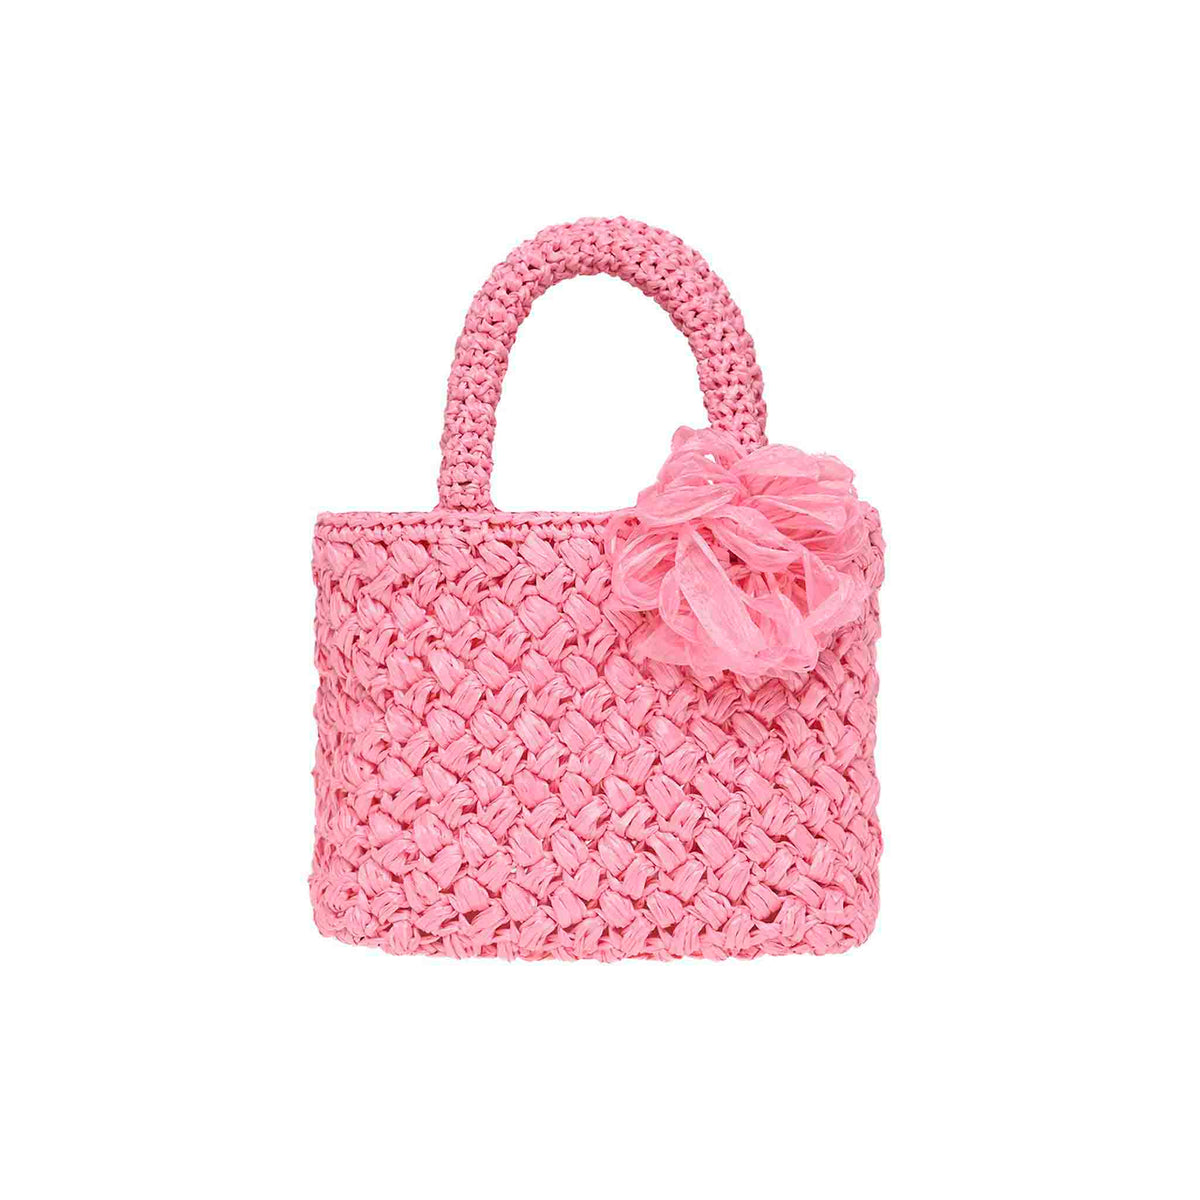 Amalfi Raffia small bag from carmen sol baby pink in color, Treasure hunt bag for birthday parties made in Italy.